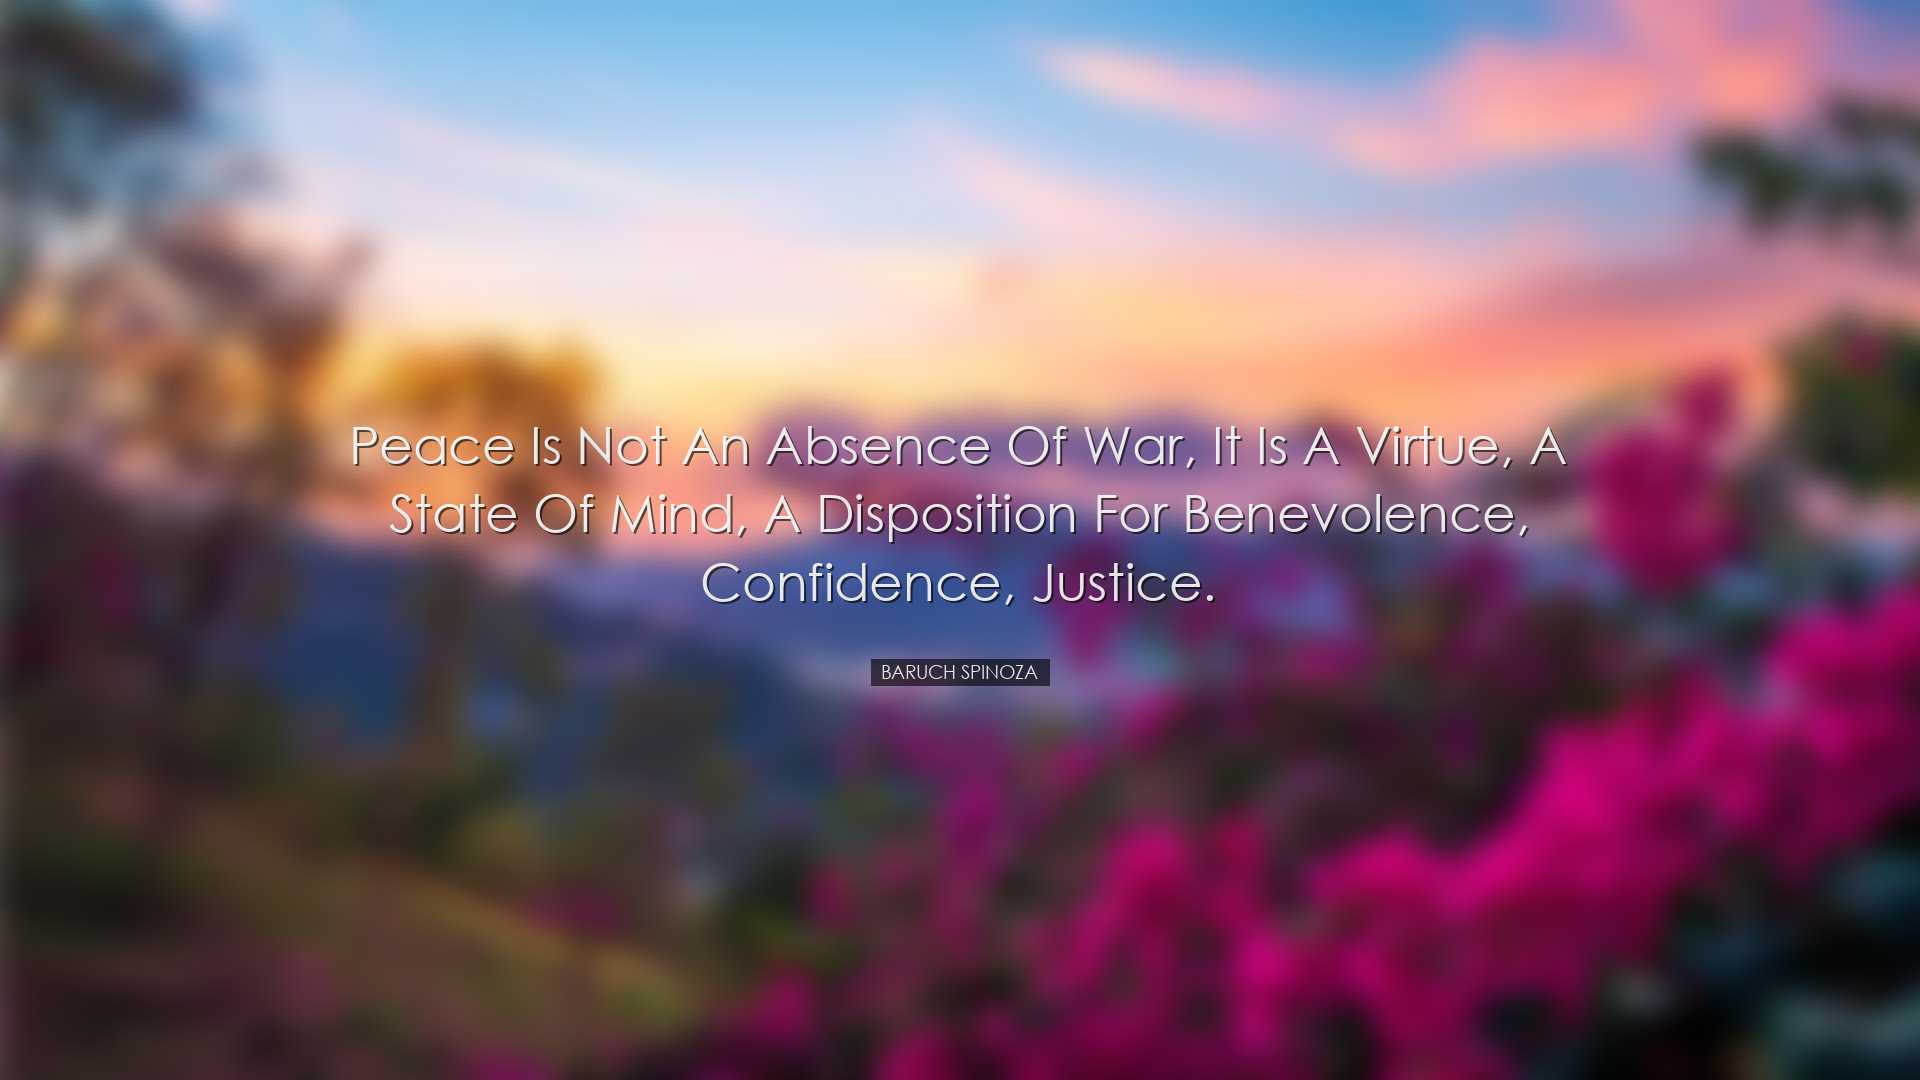 Peace is not an absence of war, it is a virtue, a state of mind, a